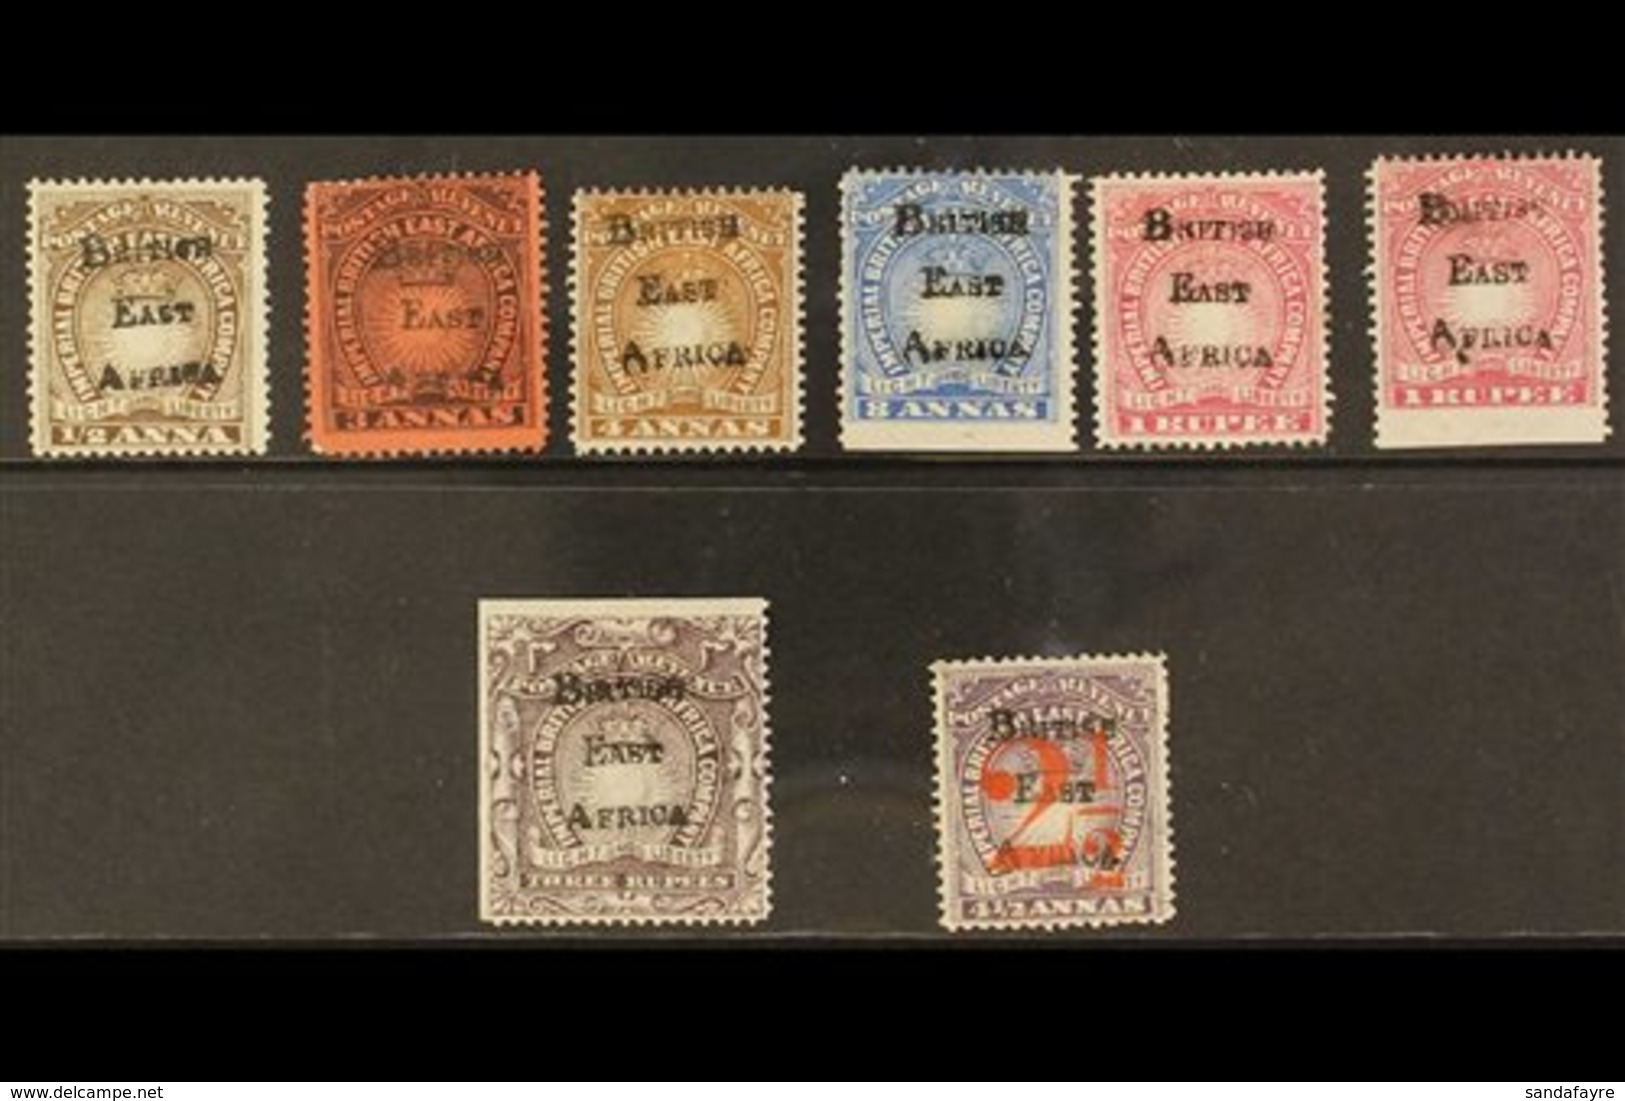 1895 "BRITISH EAST AFRICA" HANDSTAMPS On "Light And Liberty" Types Of 1890, A Useful Mint Or Unused Group With ½a, 3a, 4 - British East Africa